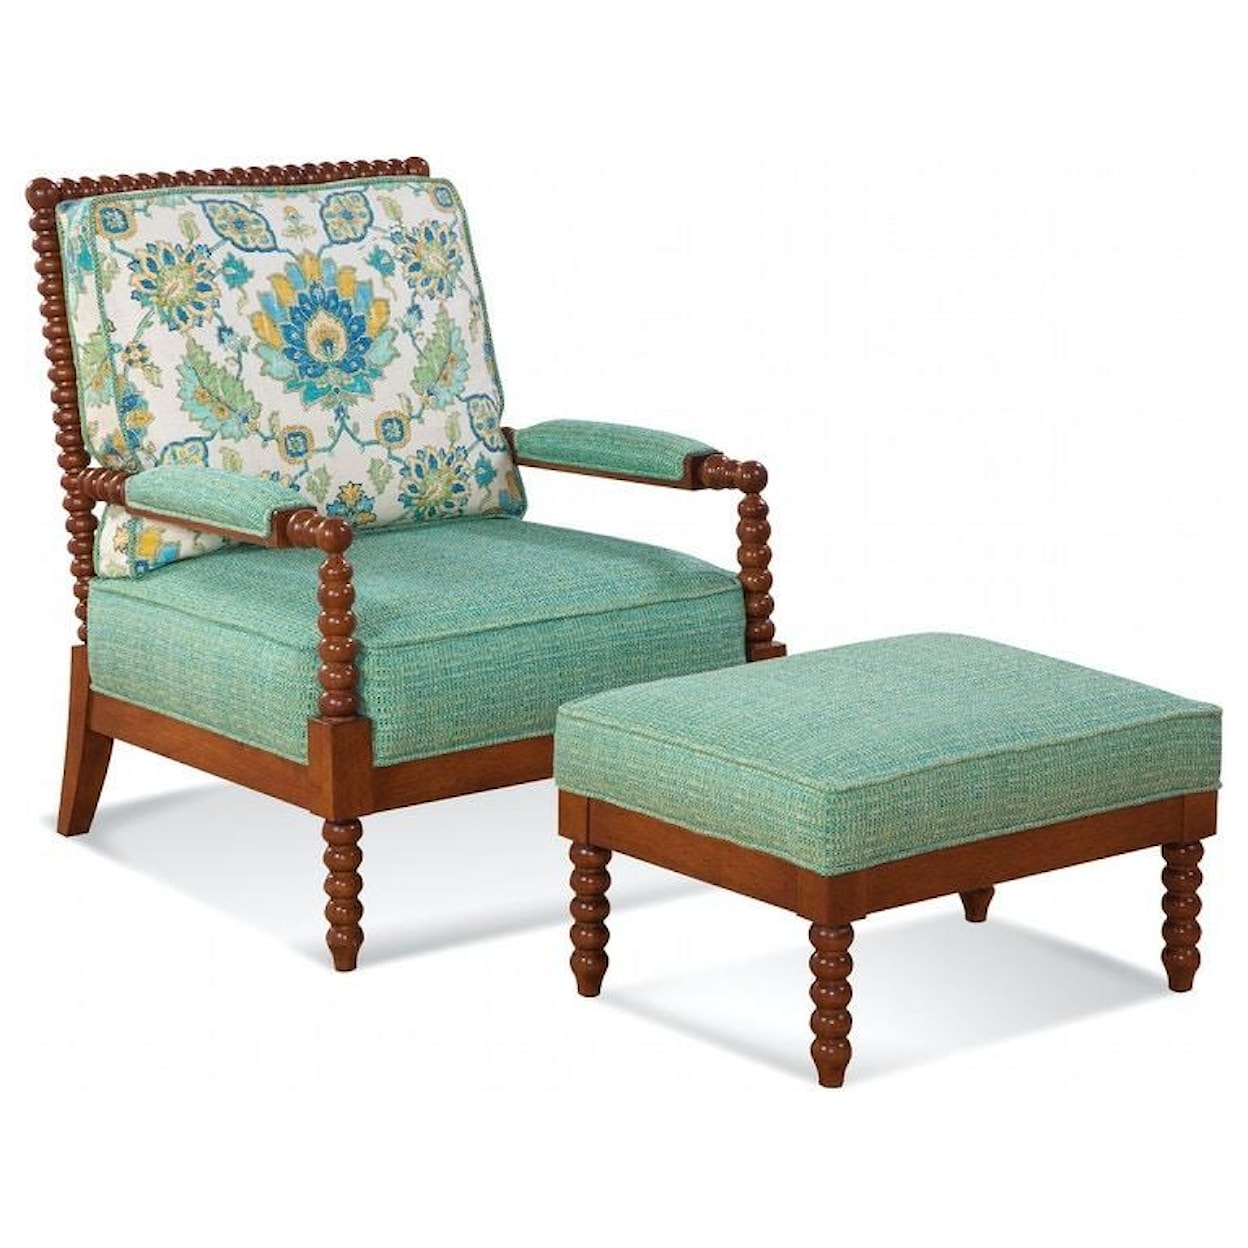 Braxton Culler Lind Island Lounge Chair and Ottoman